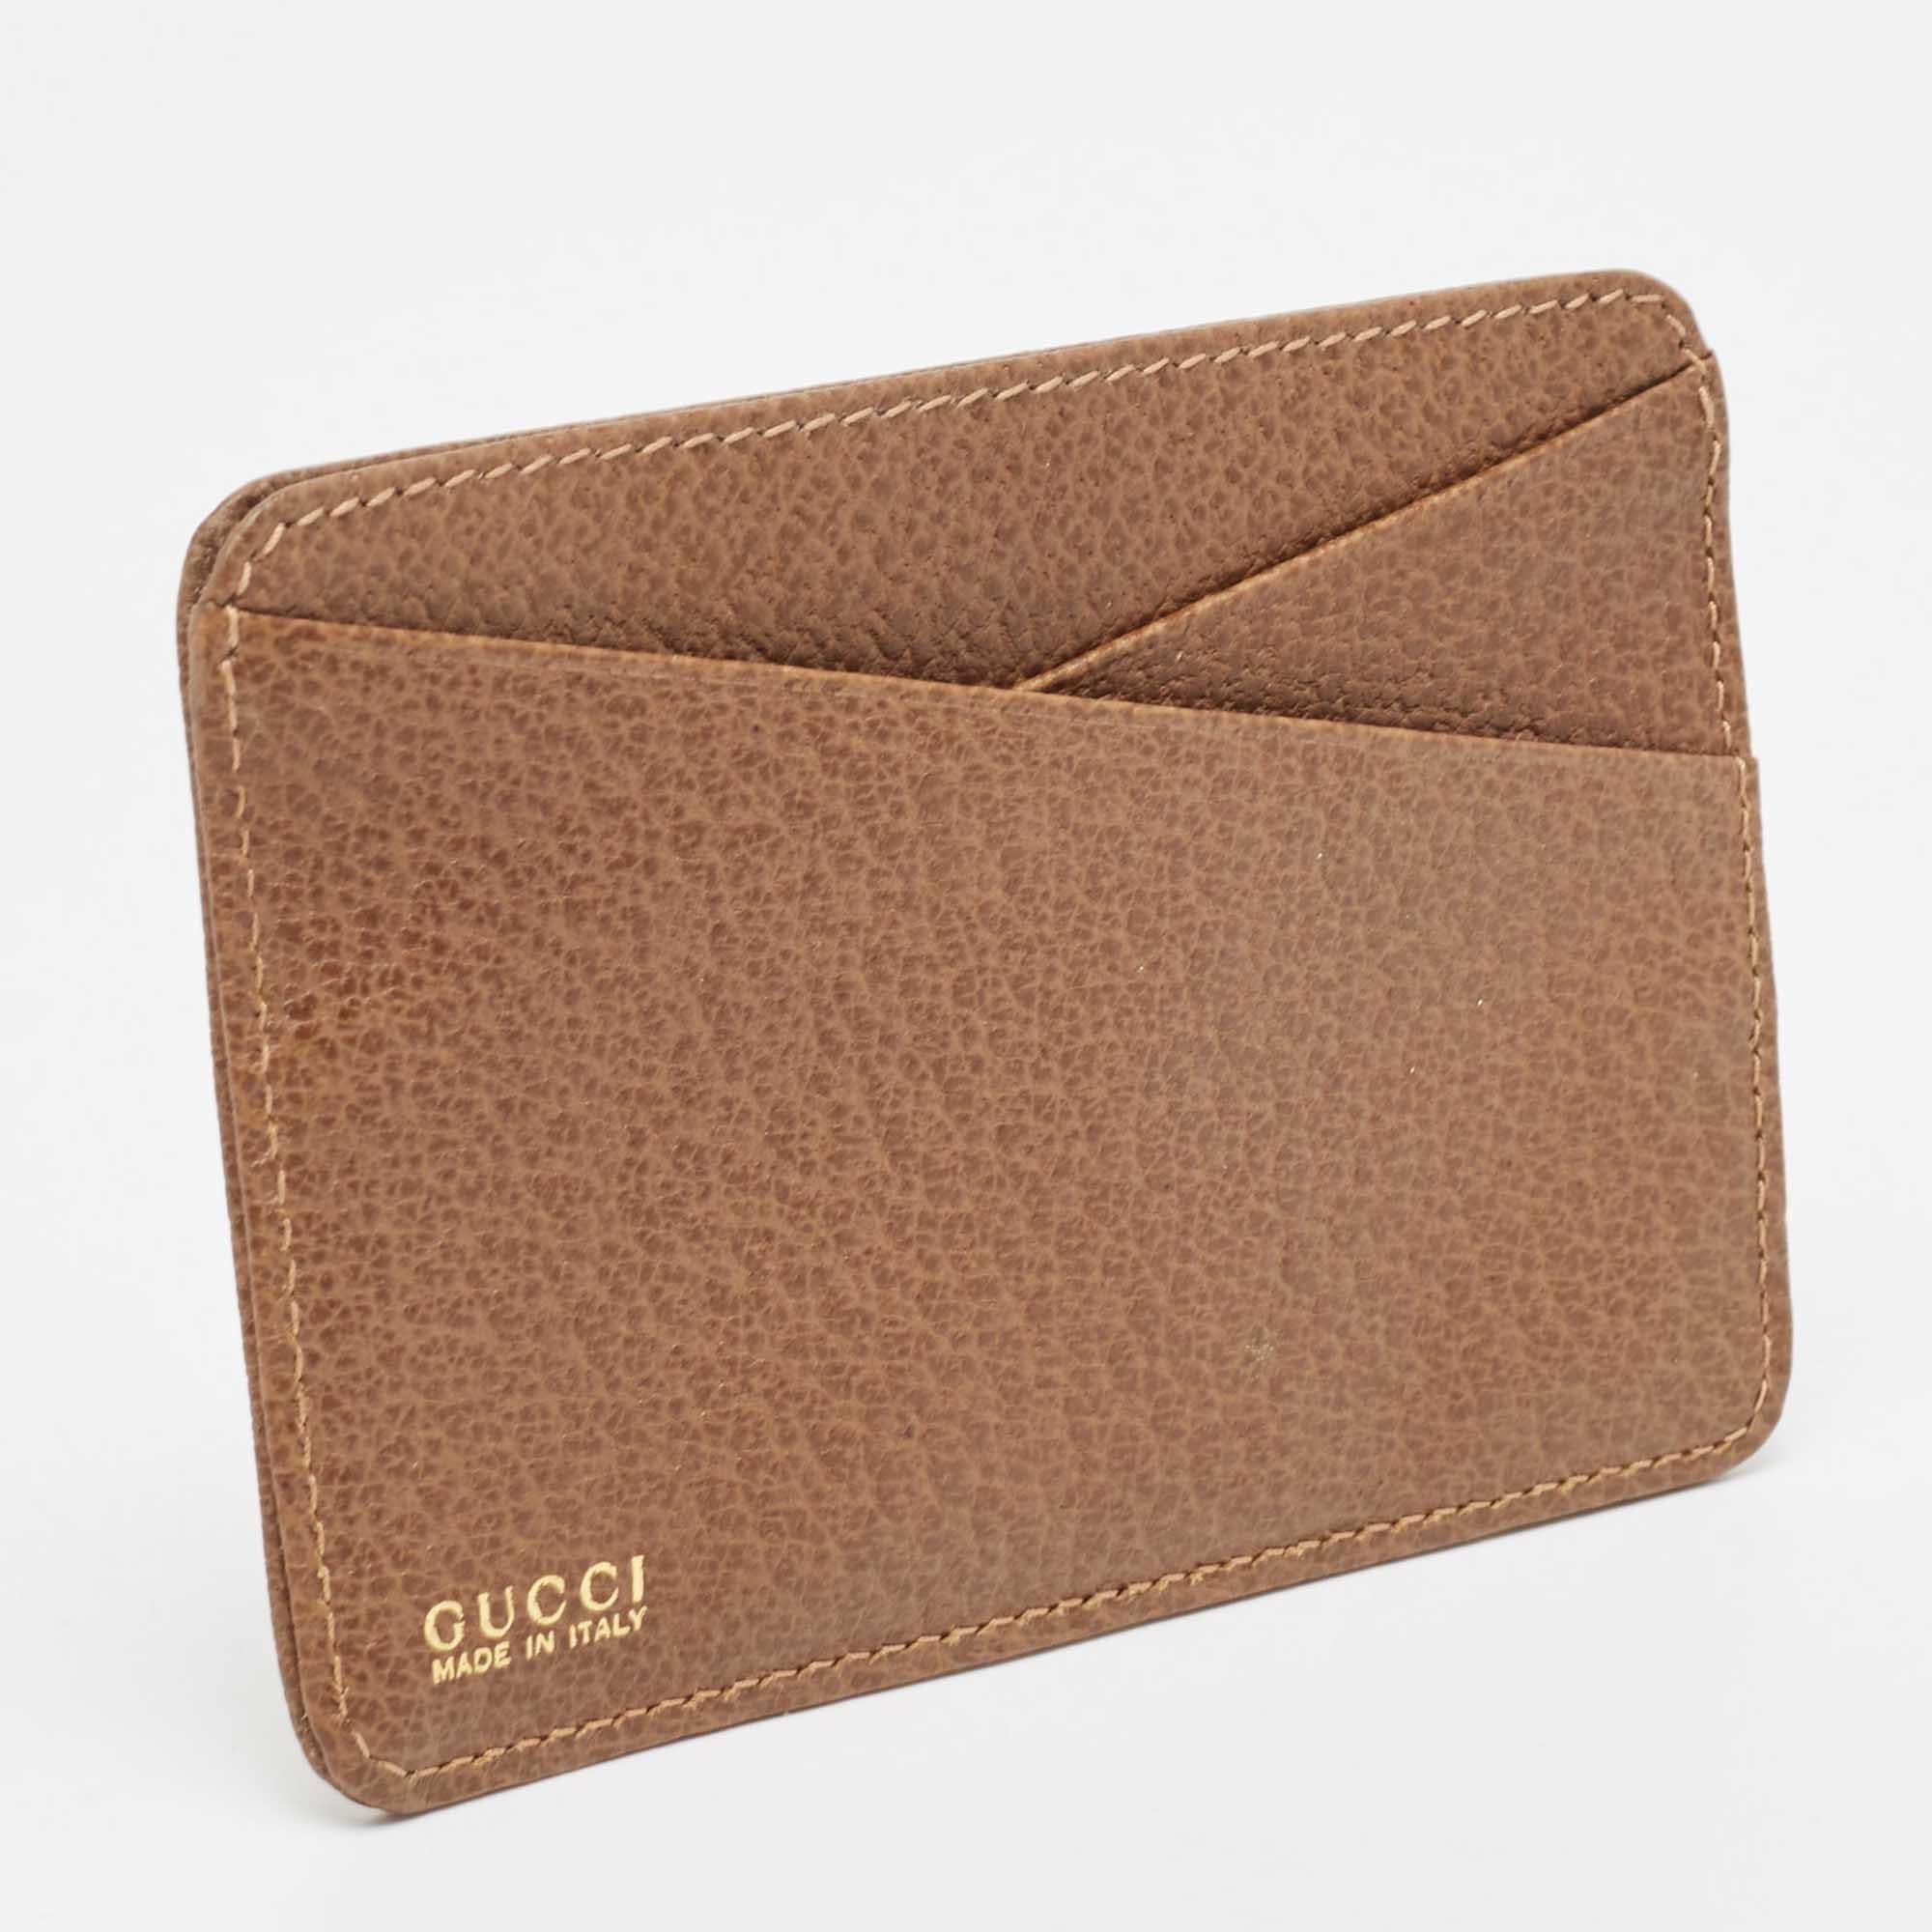 Complete your collection of accessories with this stunning Gucci creation. Crafted from leather in a timeless brown hue, the cardholder is styled with multiple slots.

